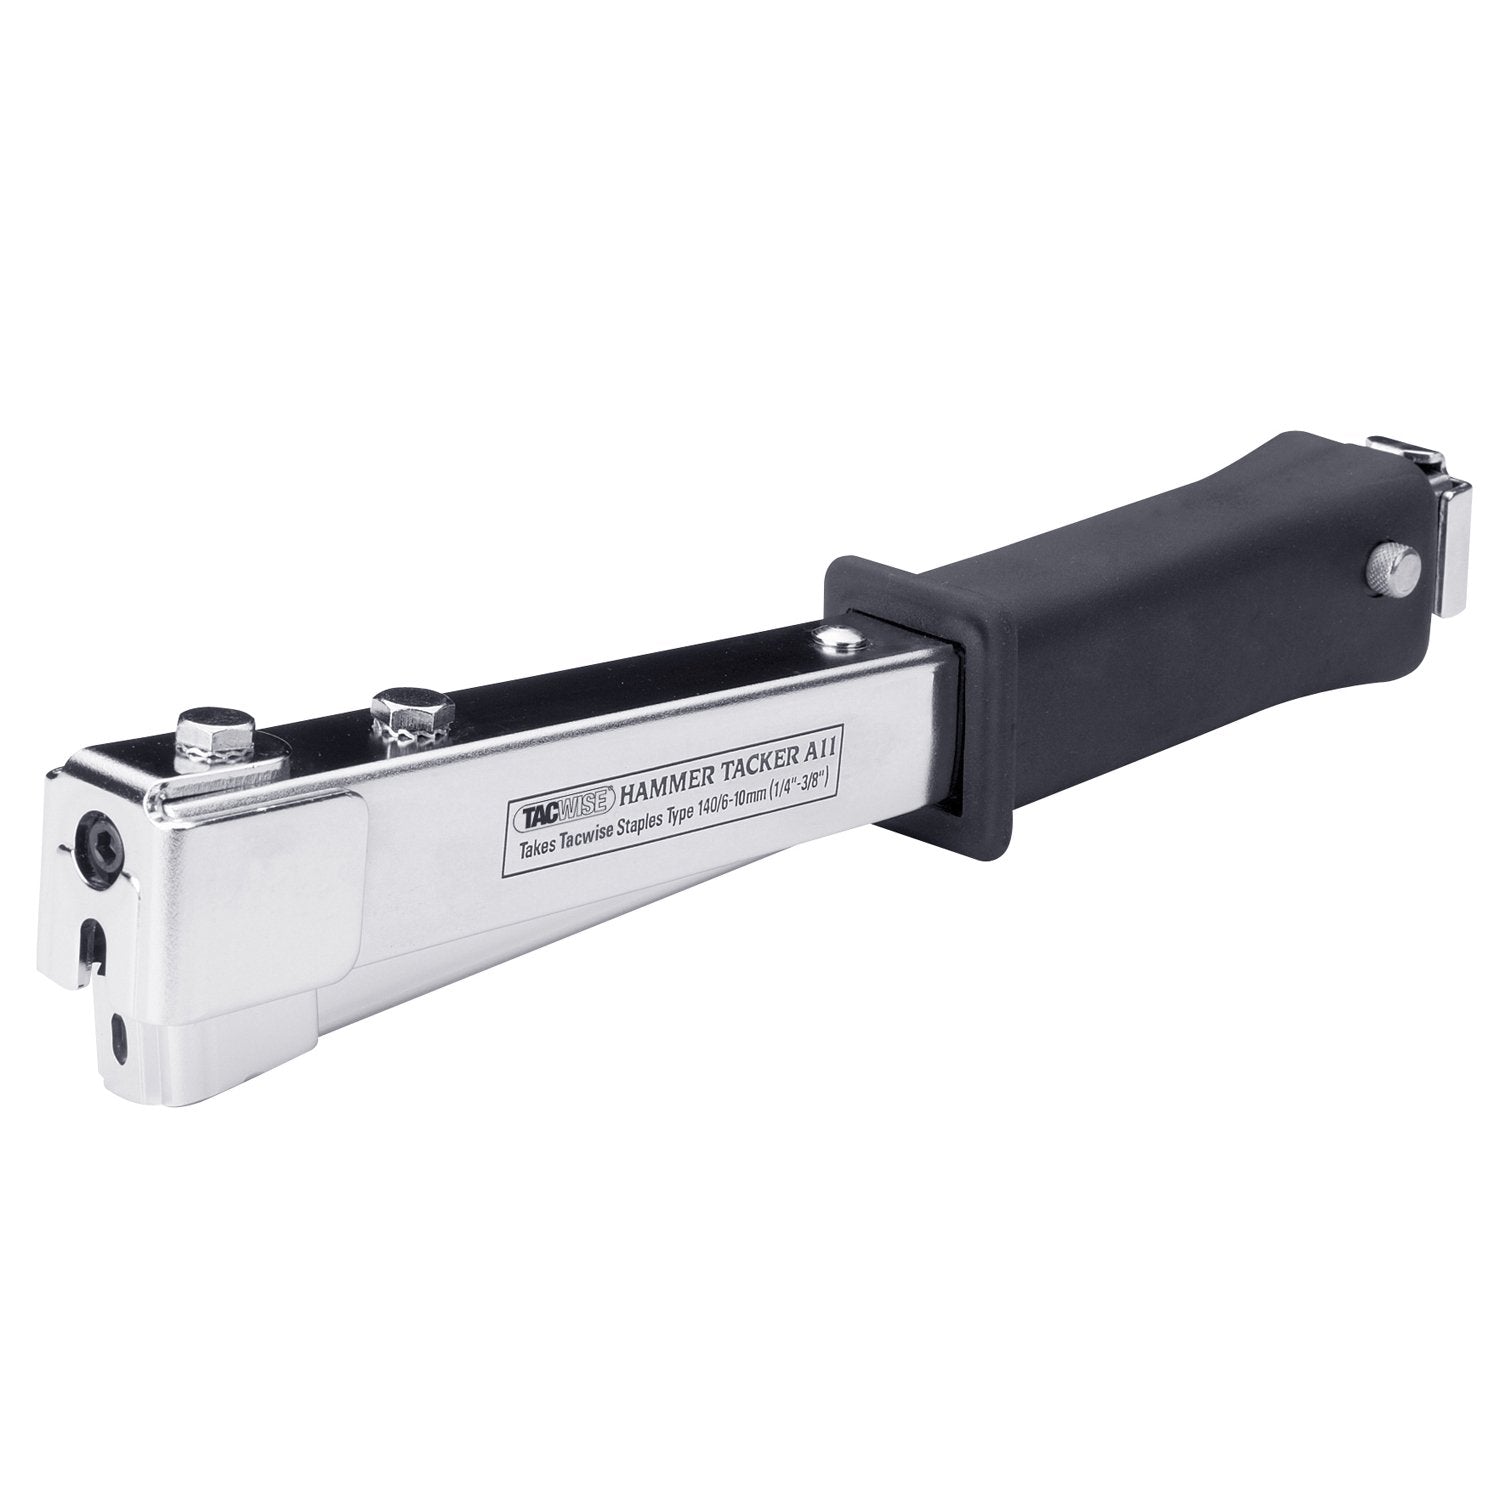 Tacwise 0322 A11 Hammer Tacker, Uses Type 140 / 6 - 10 mm Staples